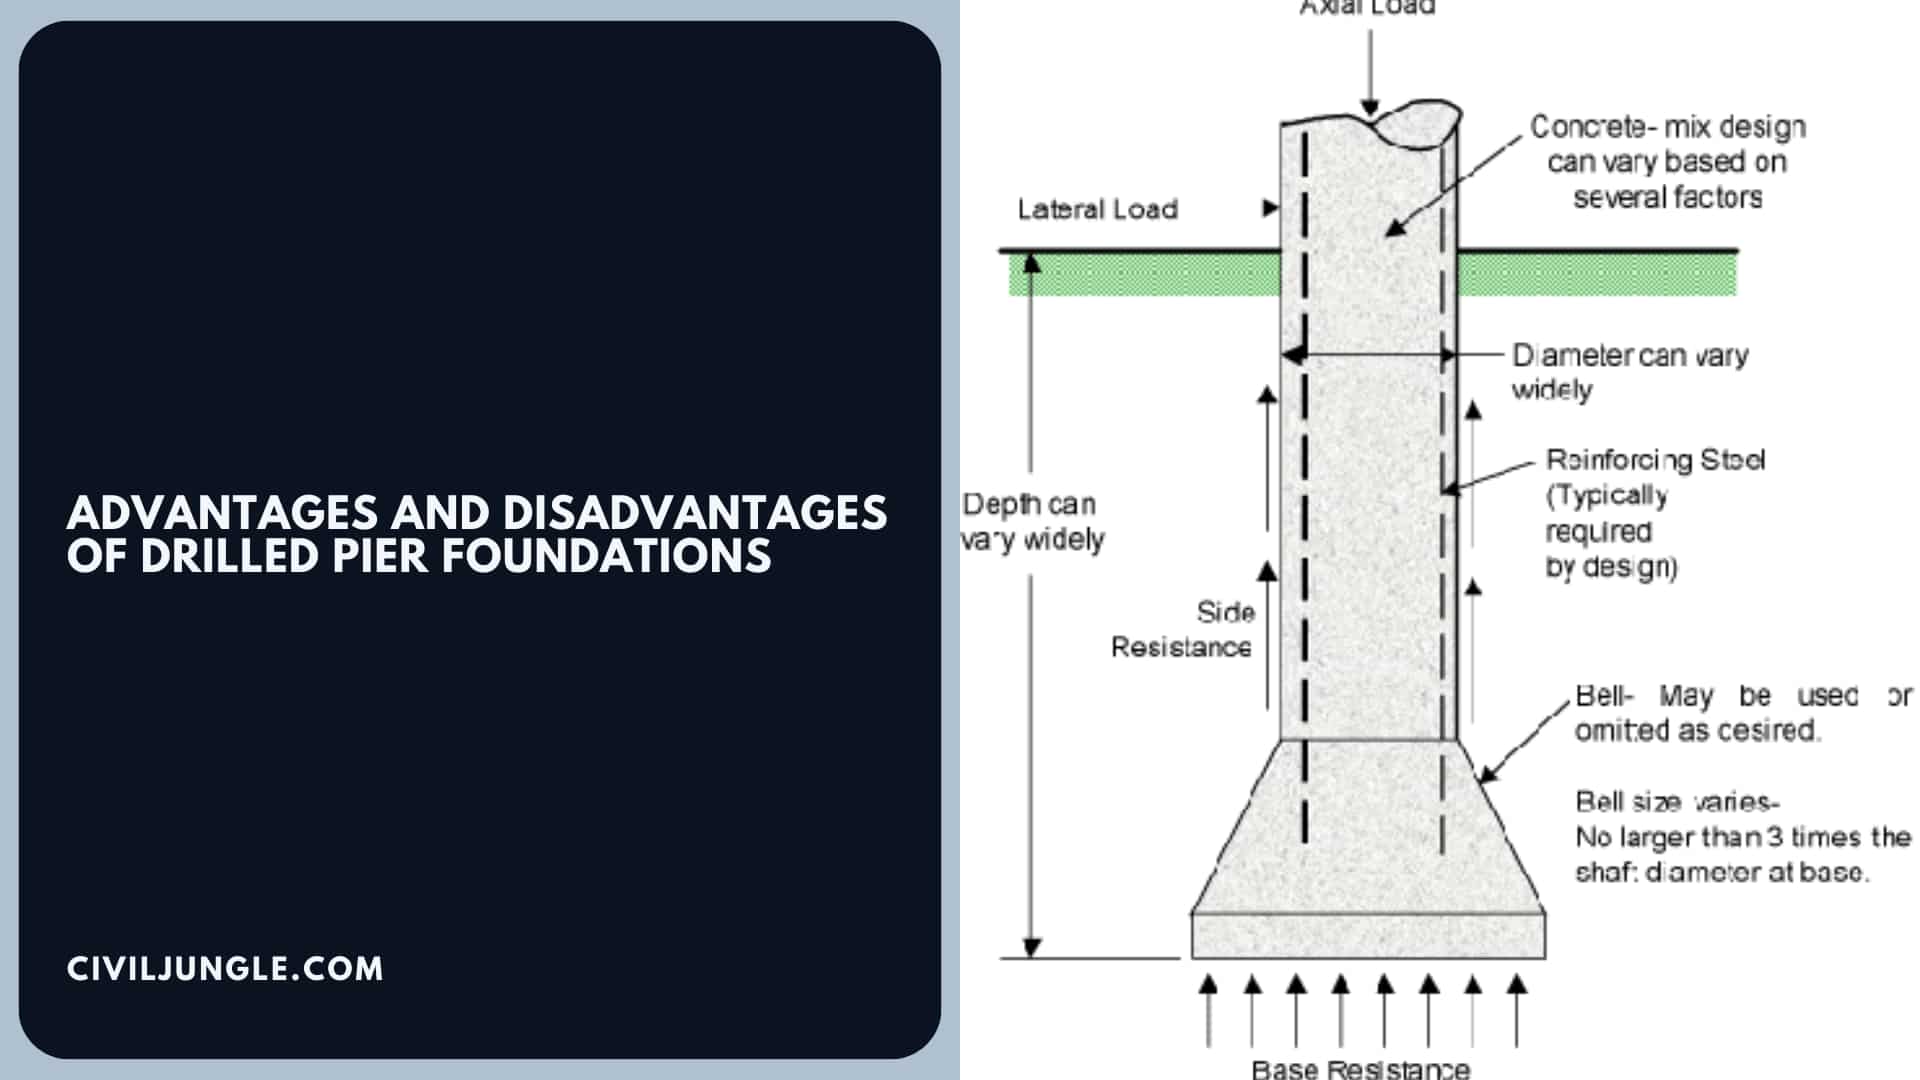 Advantages and Disadvantages of Drilled Pier Foundations